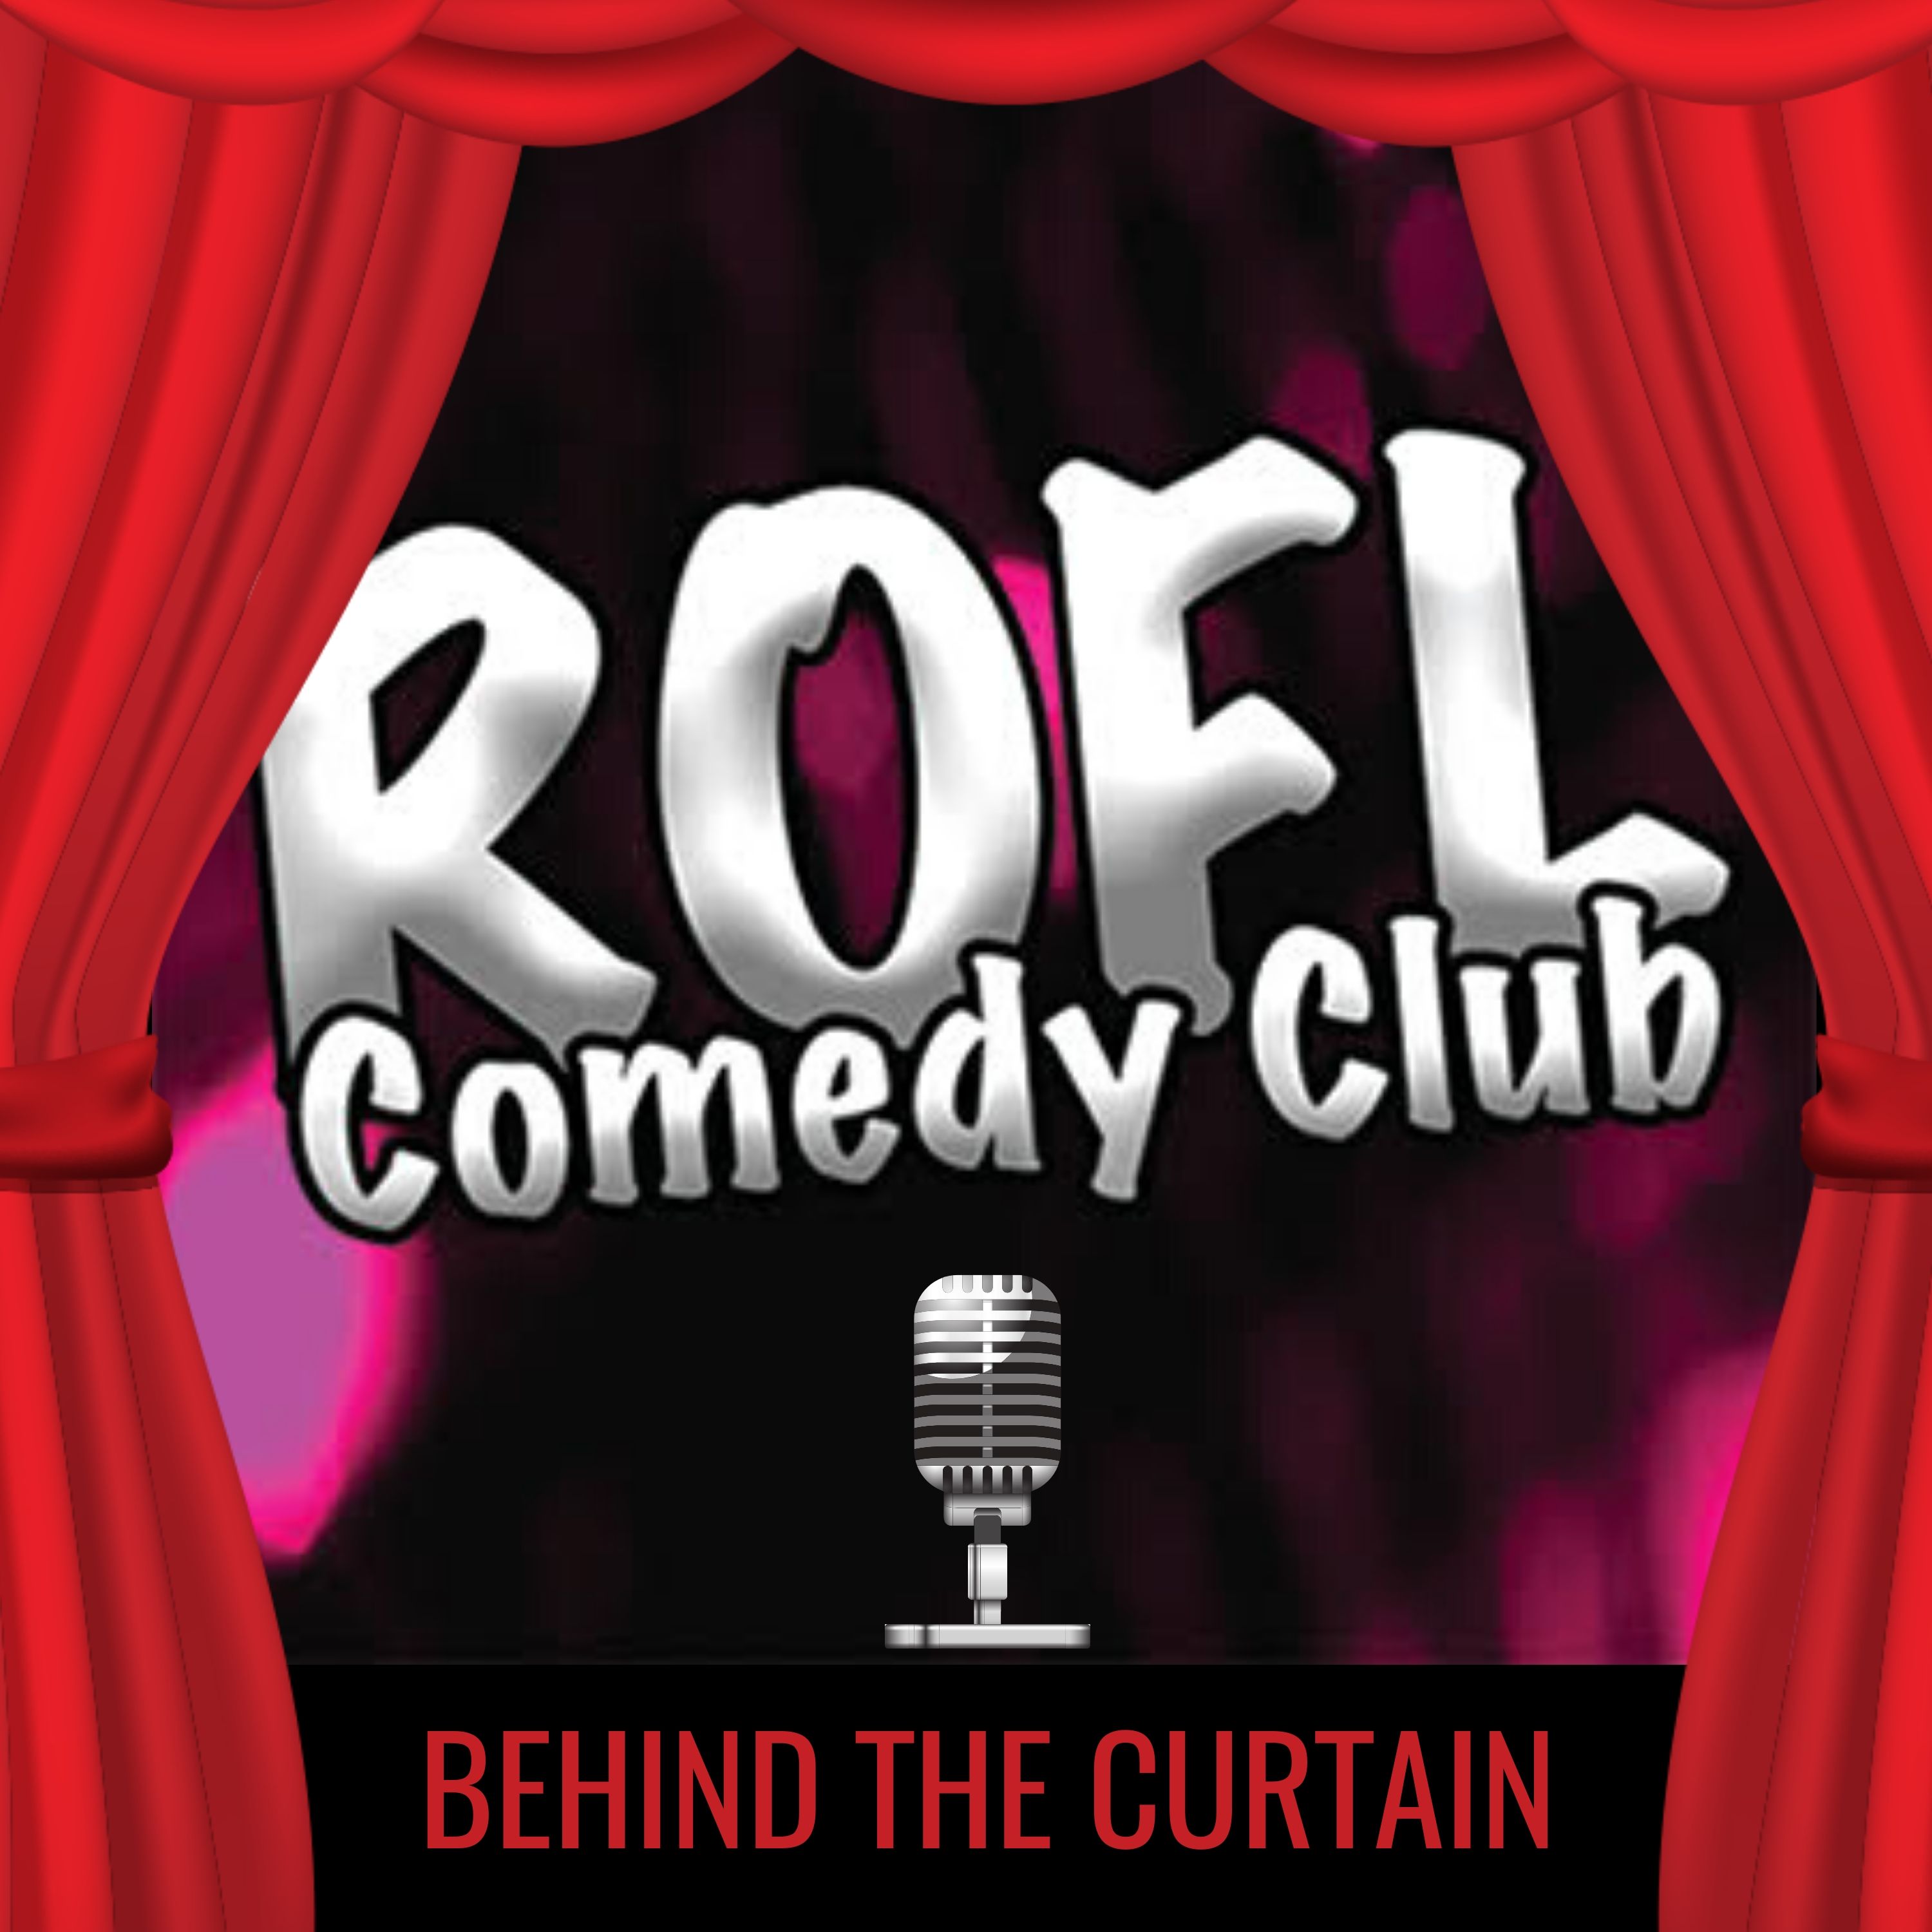 Artwork for Behind the Curtain at ROFL Comedy Club